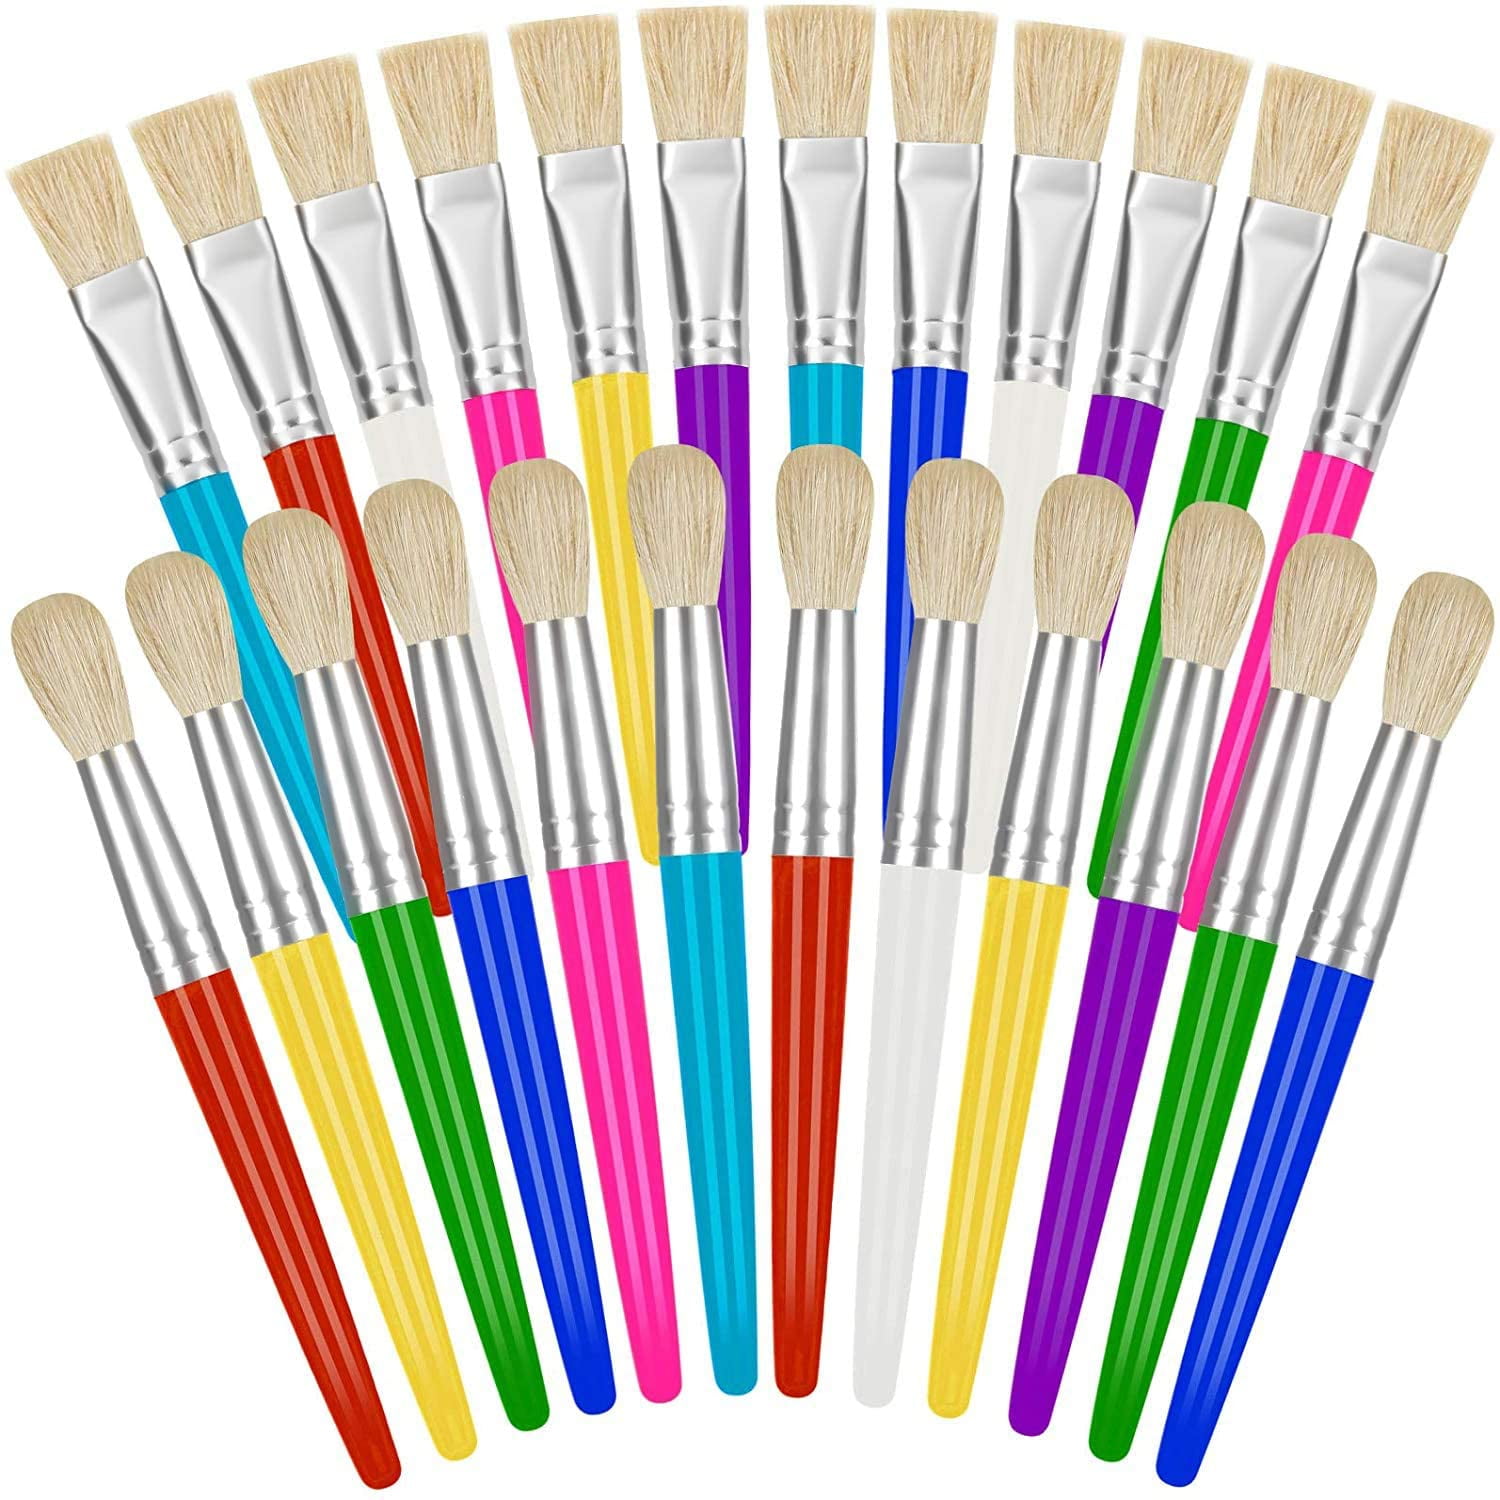 Paint Brushes for Kids, 30 Pcs Flat Kids Paint Brushes, Easy to Use and  Clean Small Classroom Paint Brushes Bulk for Acrylic Watercolor Canvas Face